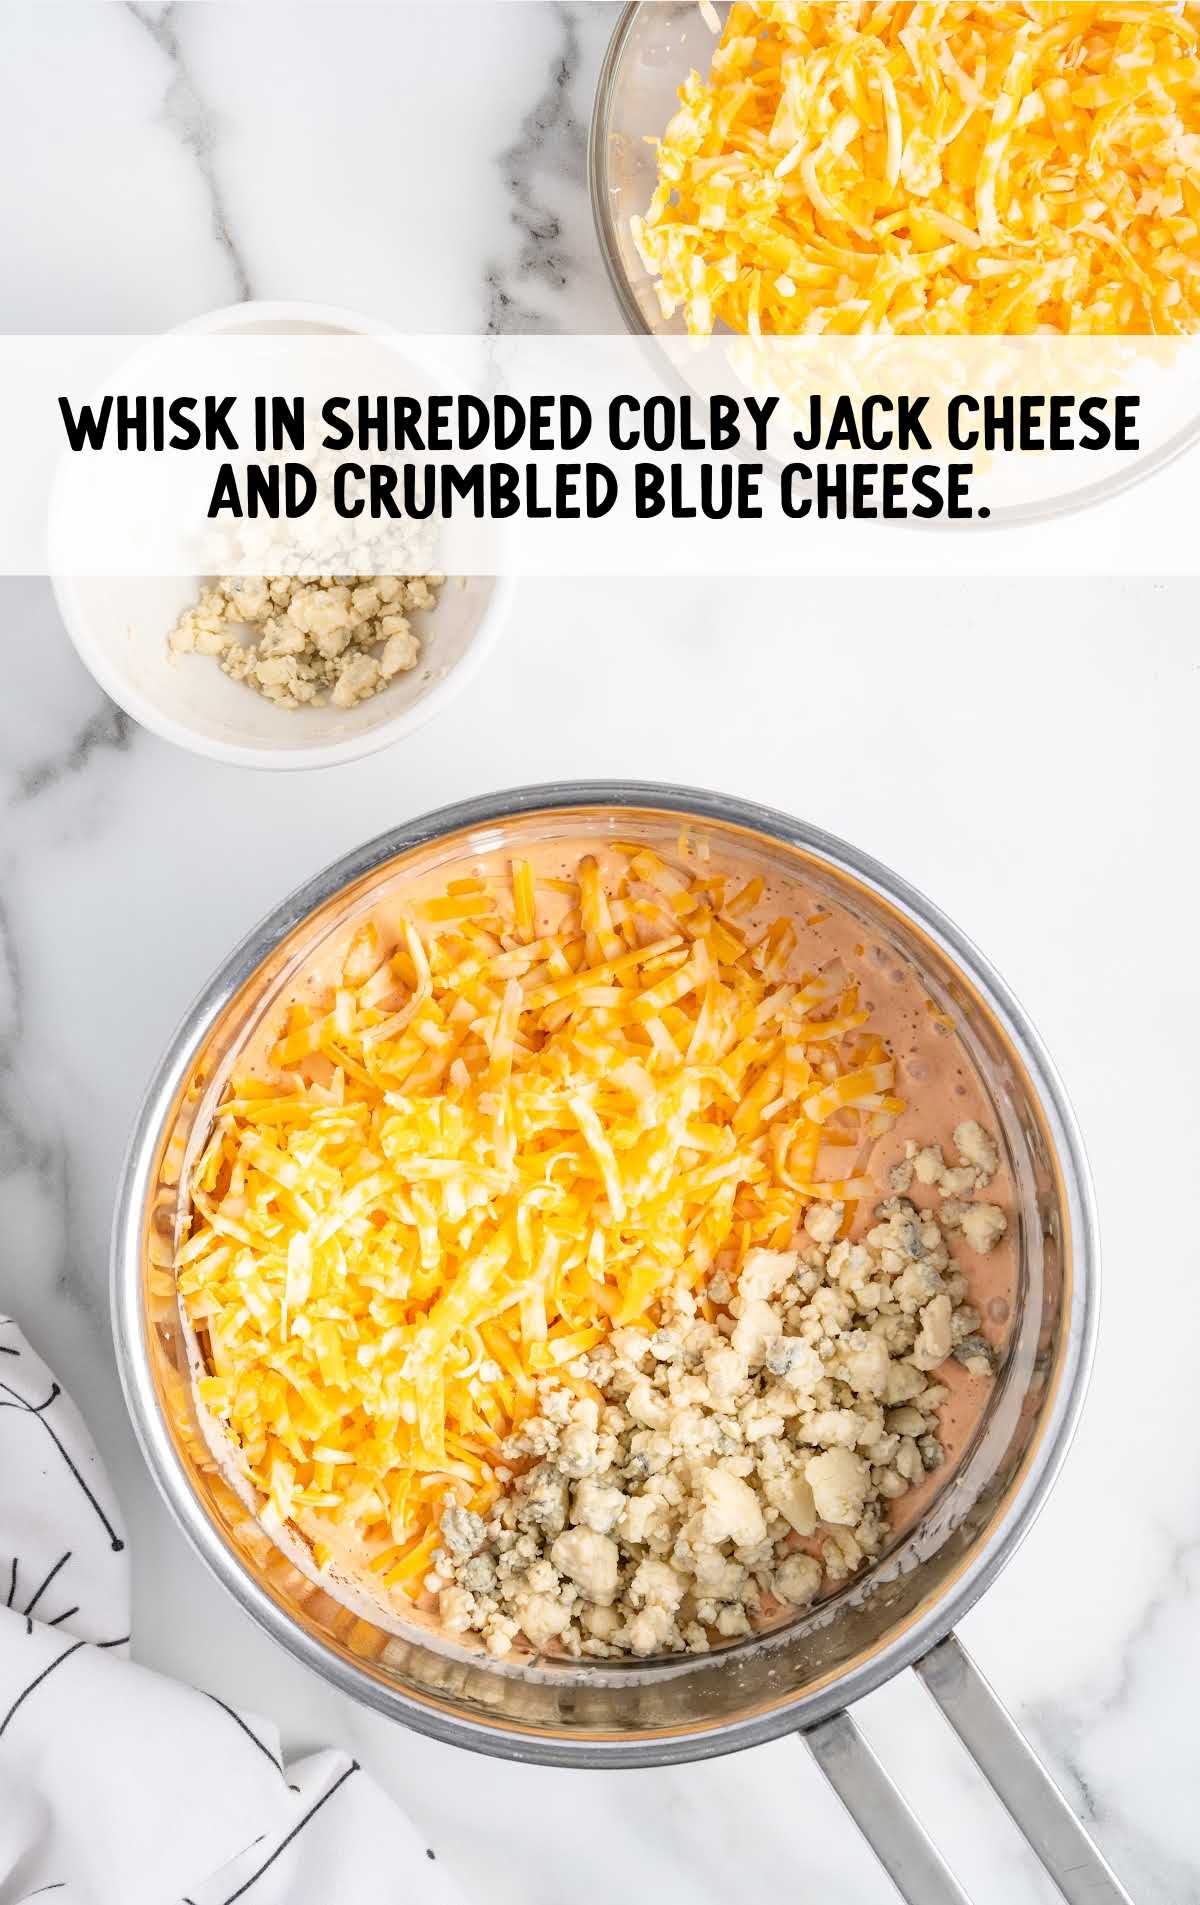 shredded colby jack cheese and crumbled blue cheese whisked